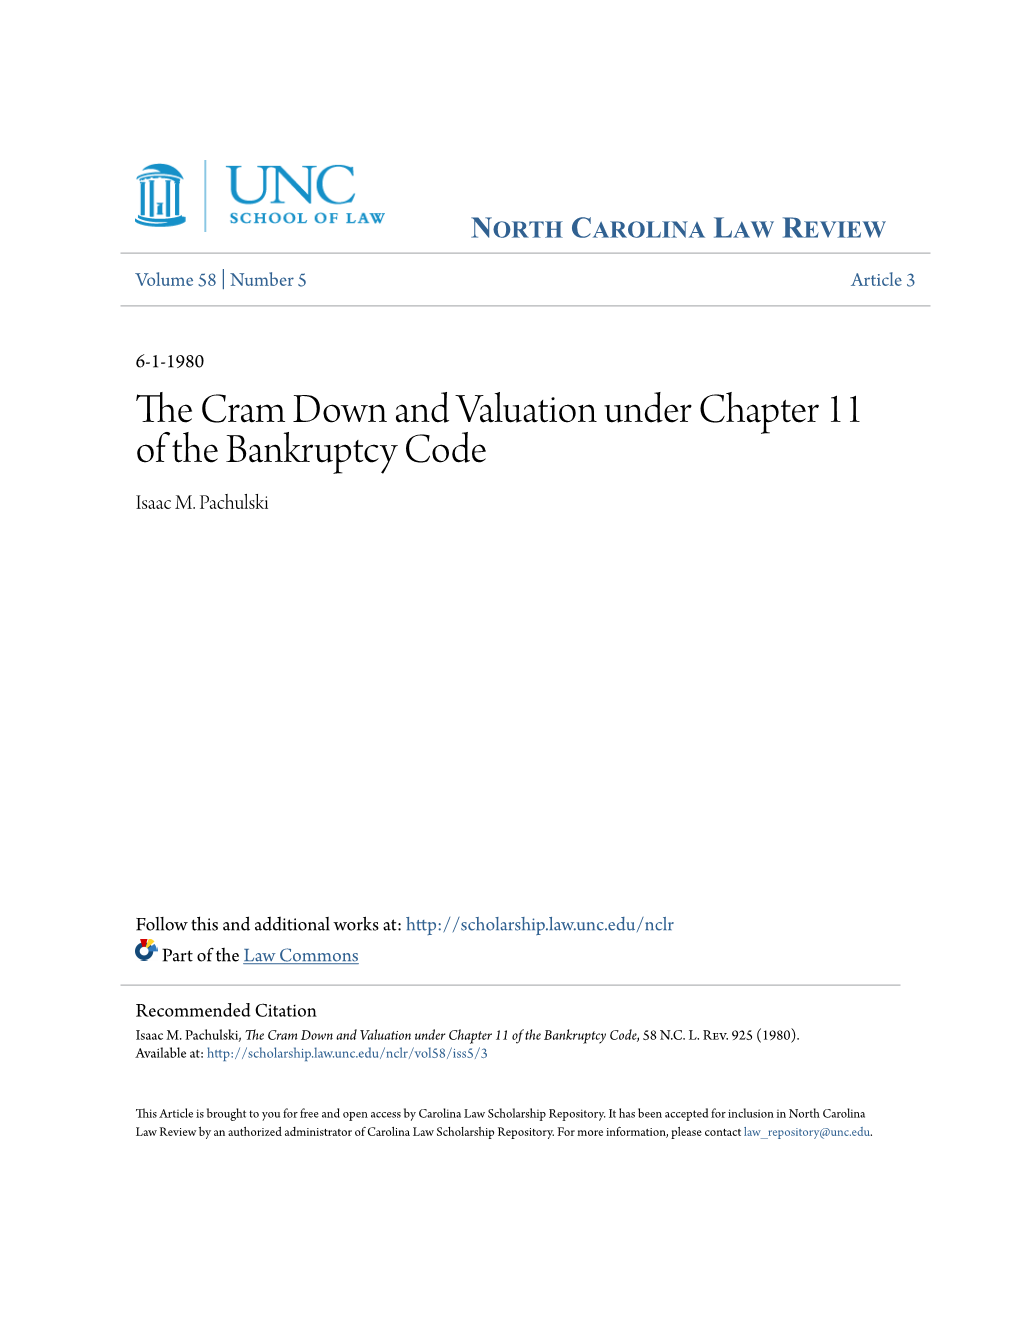 The Cram Down and Valuation Under Chapter 11 of the Bankruptcy Code, 58 N.C